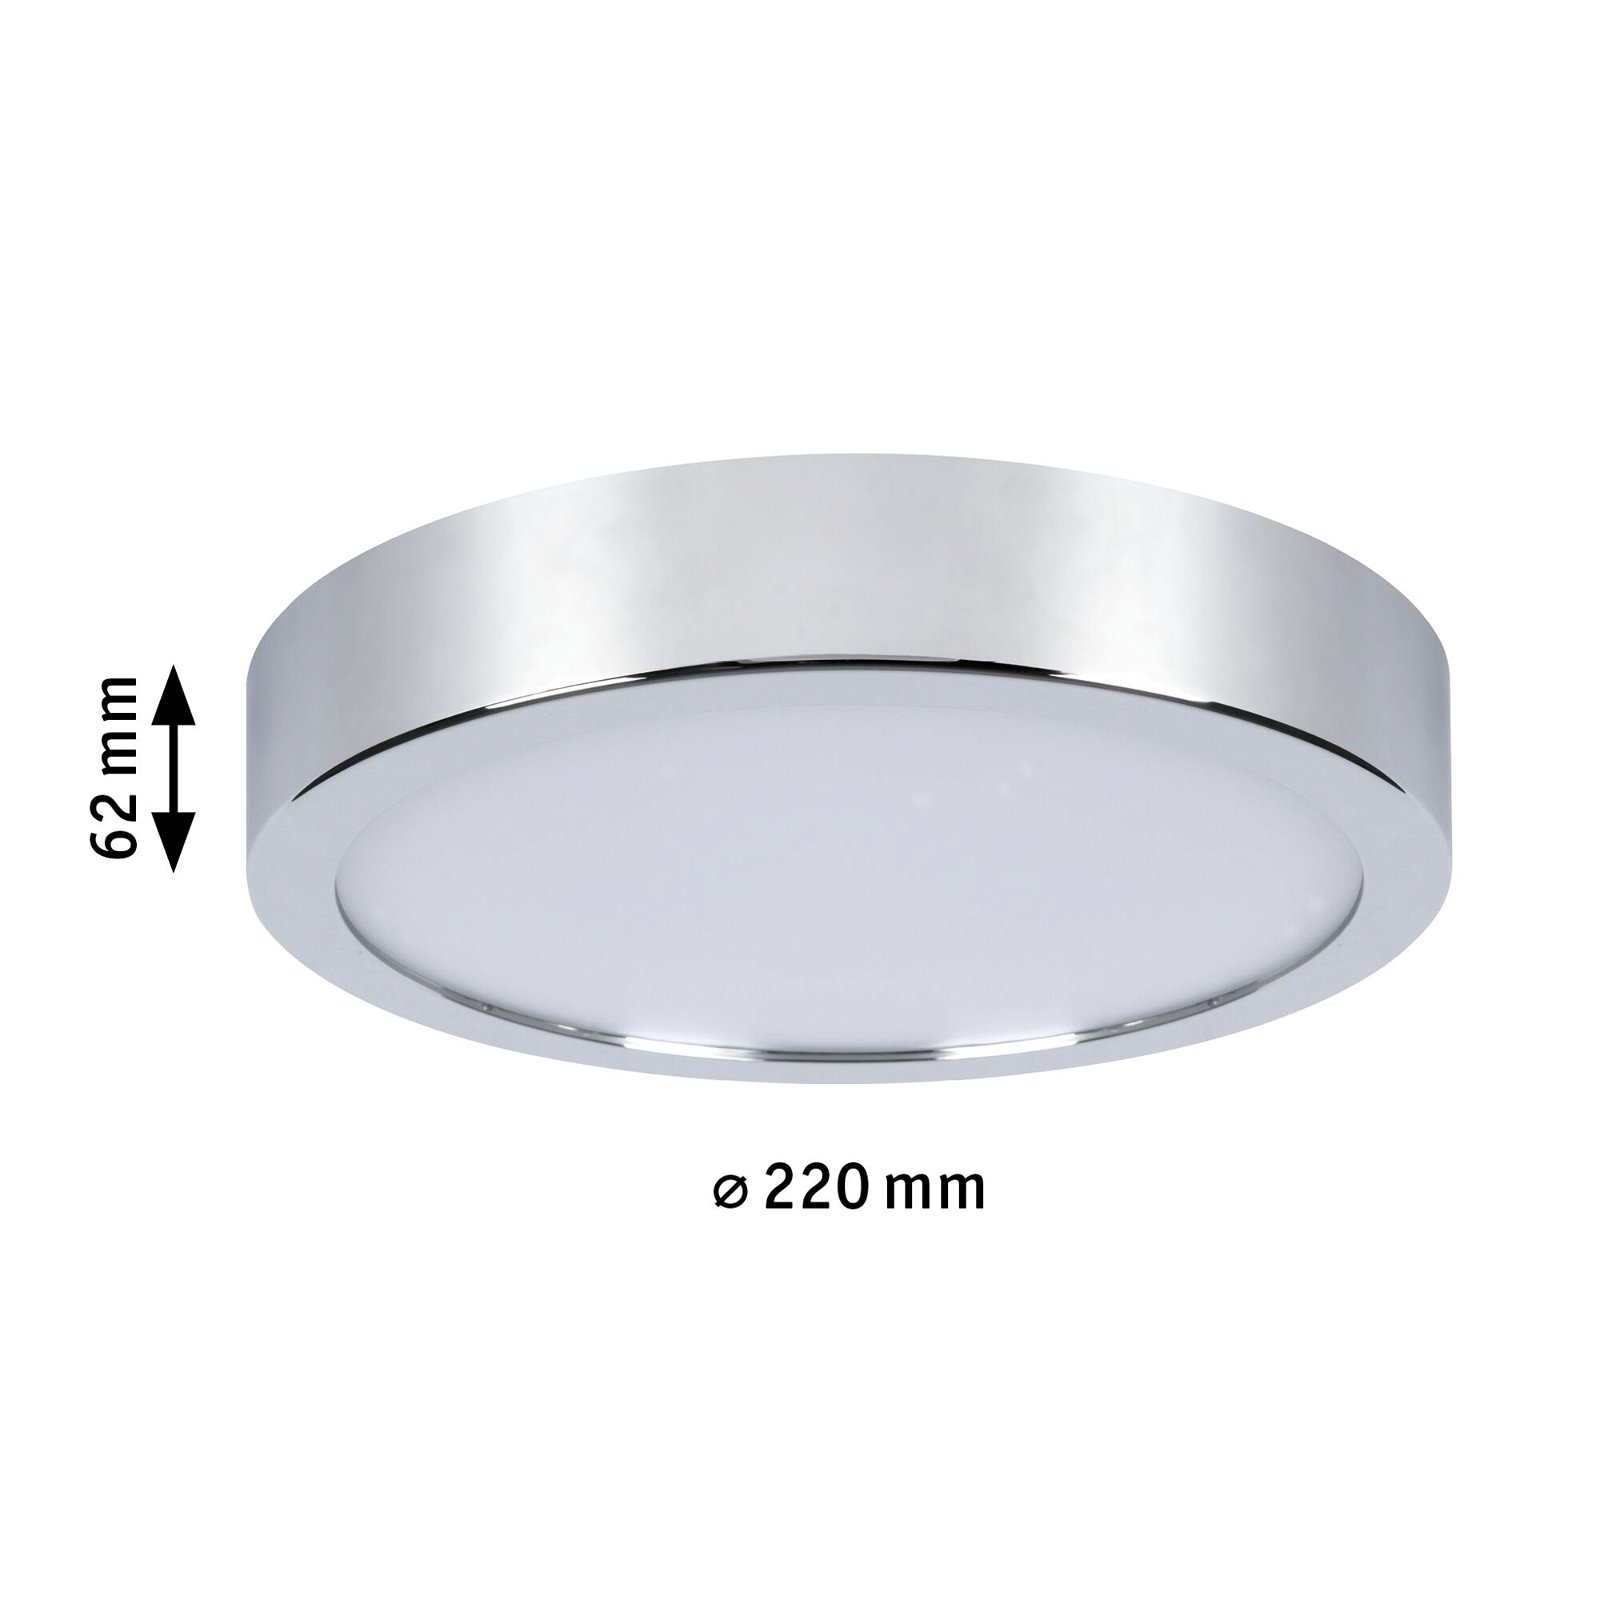 LED Panel Aviar IP44 round 220mm 13W 950lm 4000K Chrome dimmable